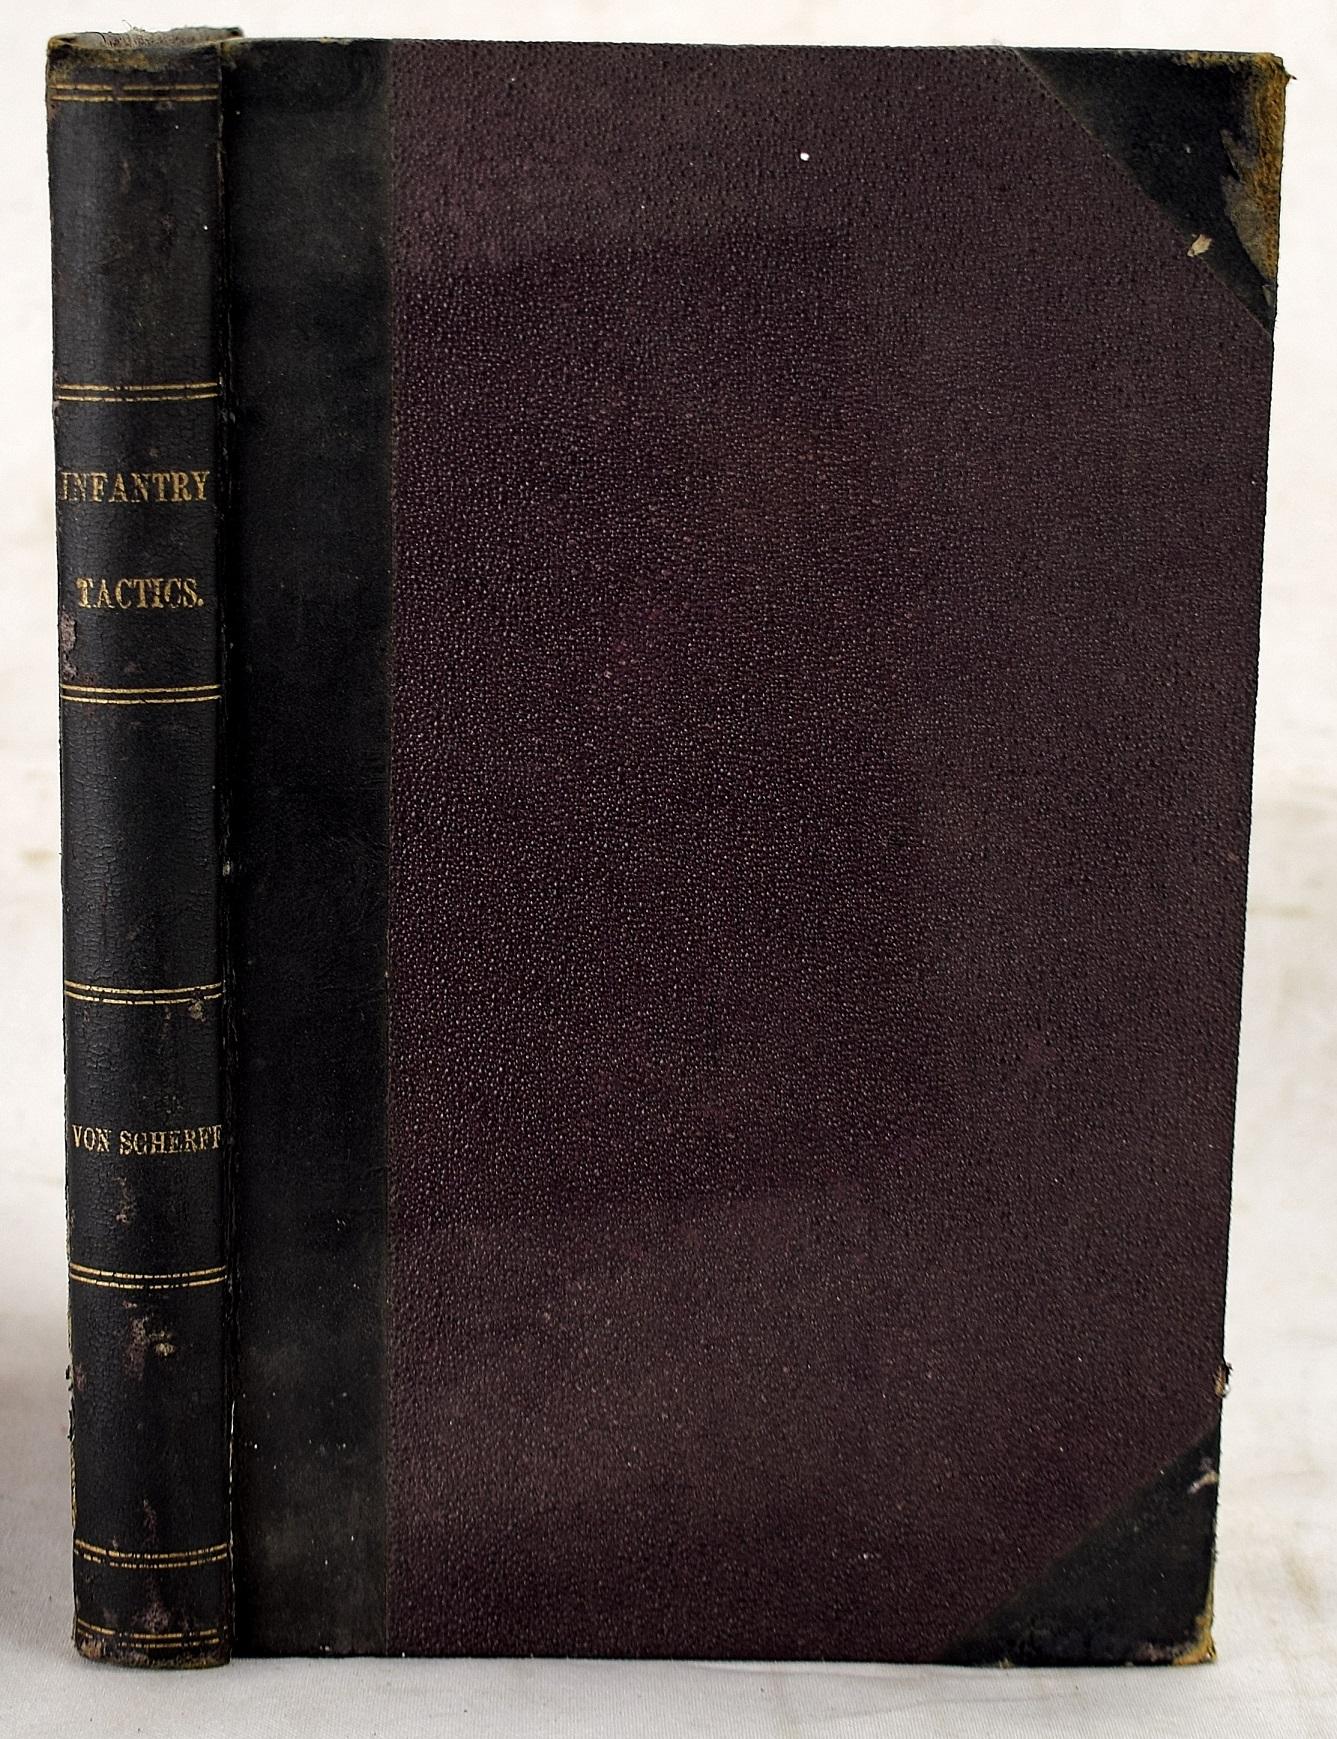 The new tactics of infantry : (studies in) by Major W von Scherff: Good  Hardcover (1891) First Edition.